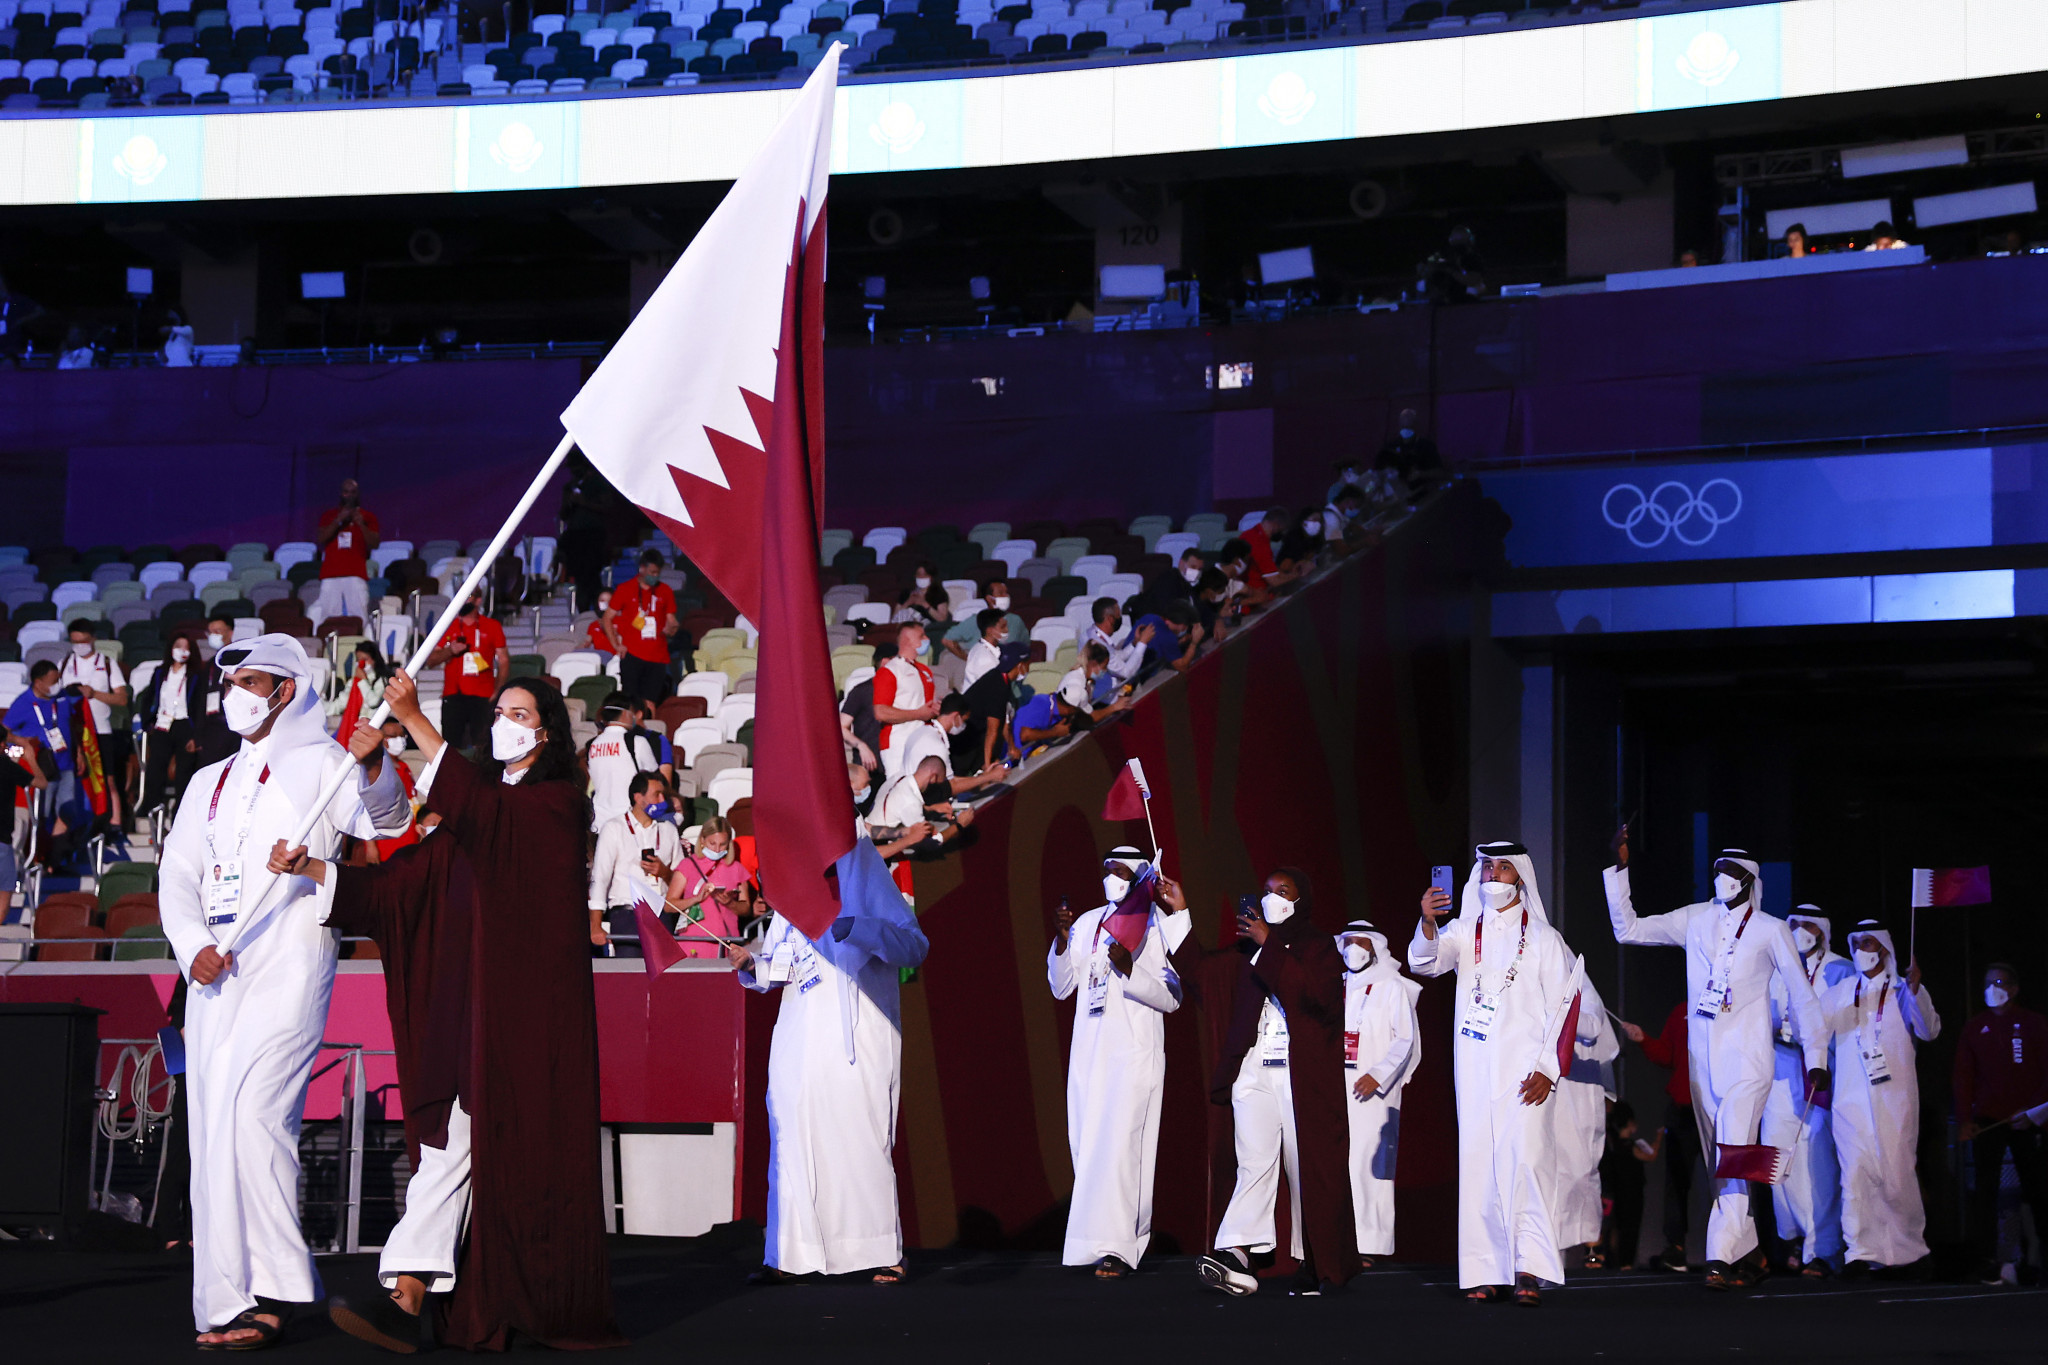 Qatar could host the Olympics "tomorrow" according to Asian Weightlifting Federation President Yousef Al Mana ©Getty Images